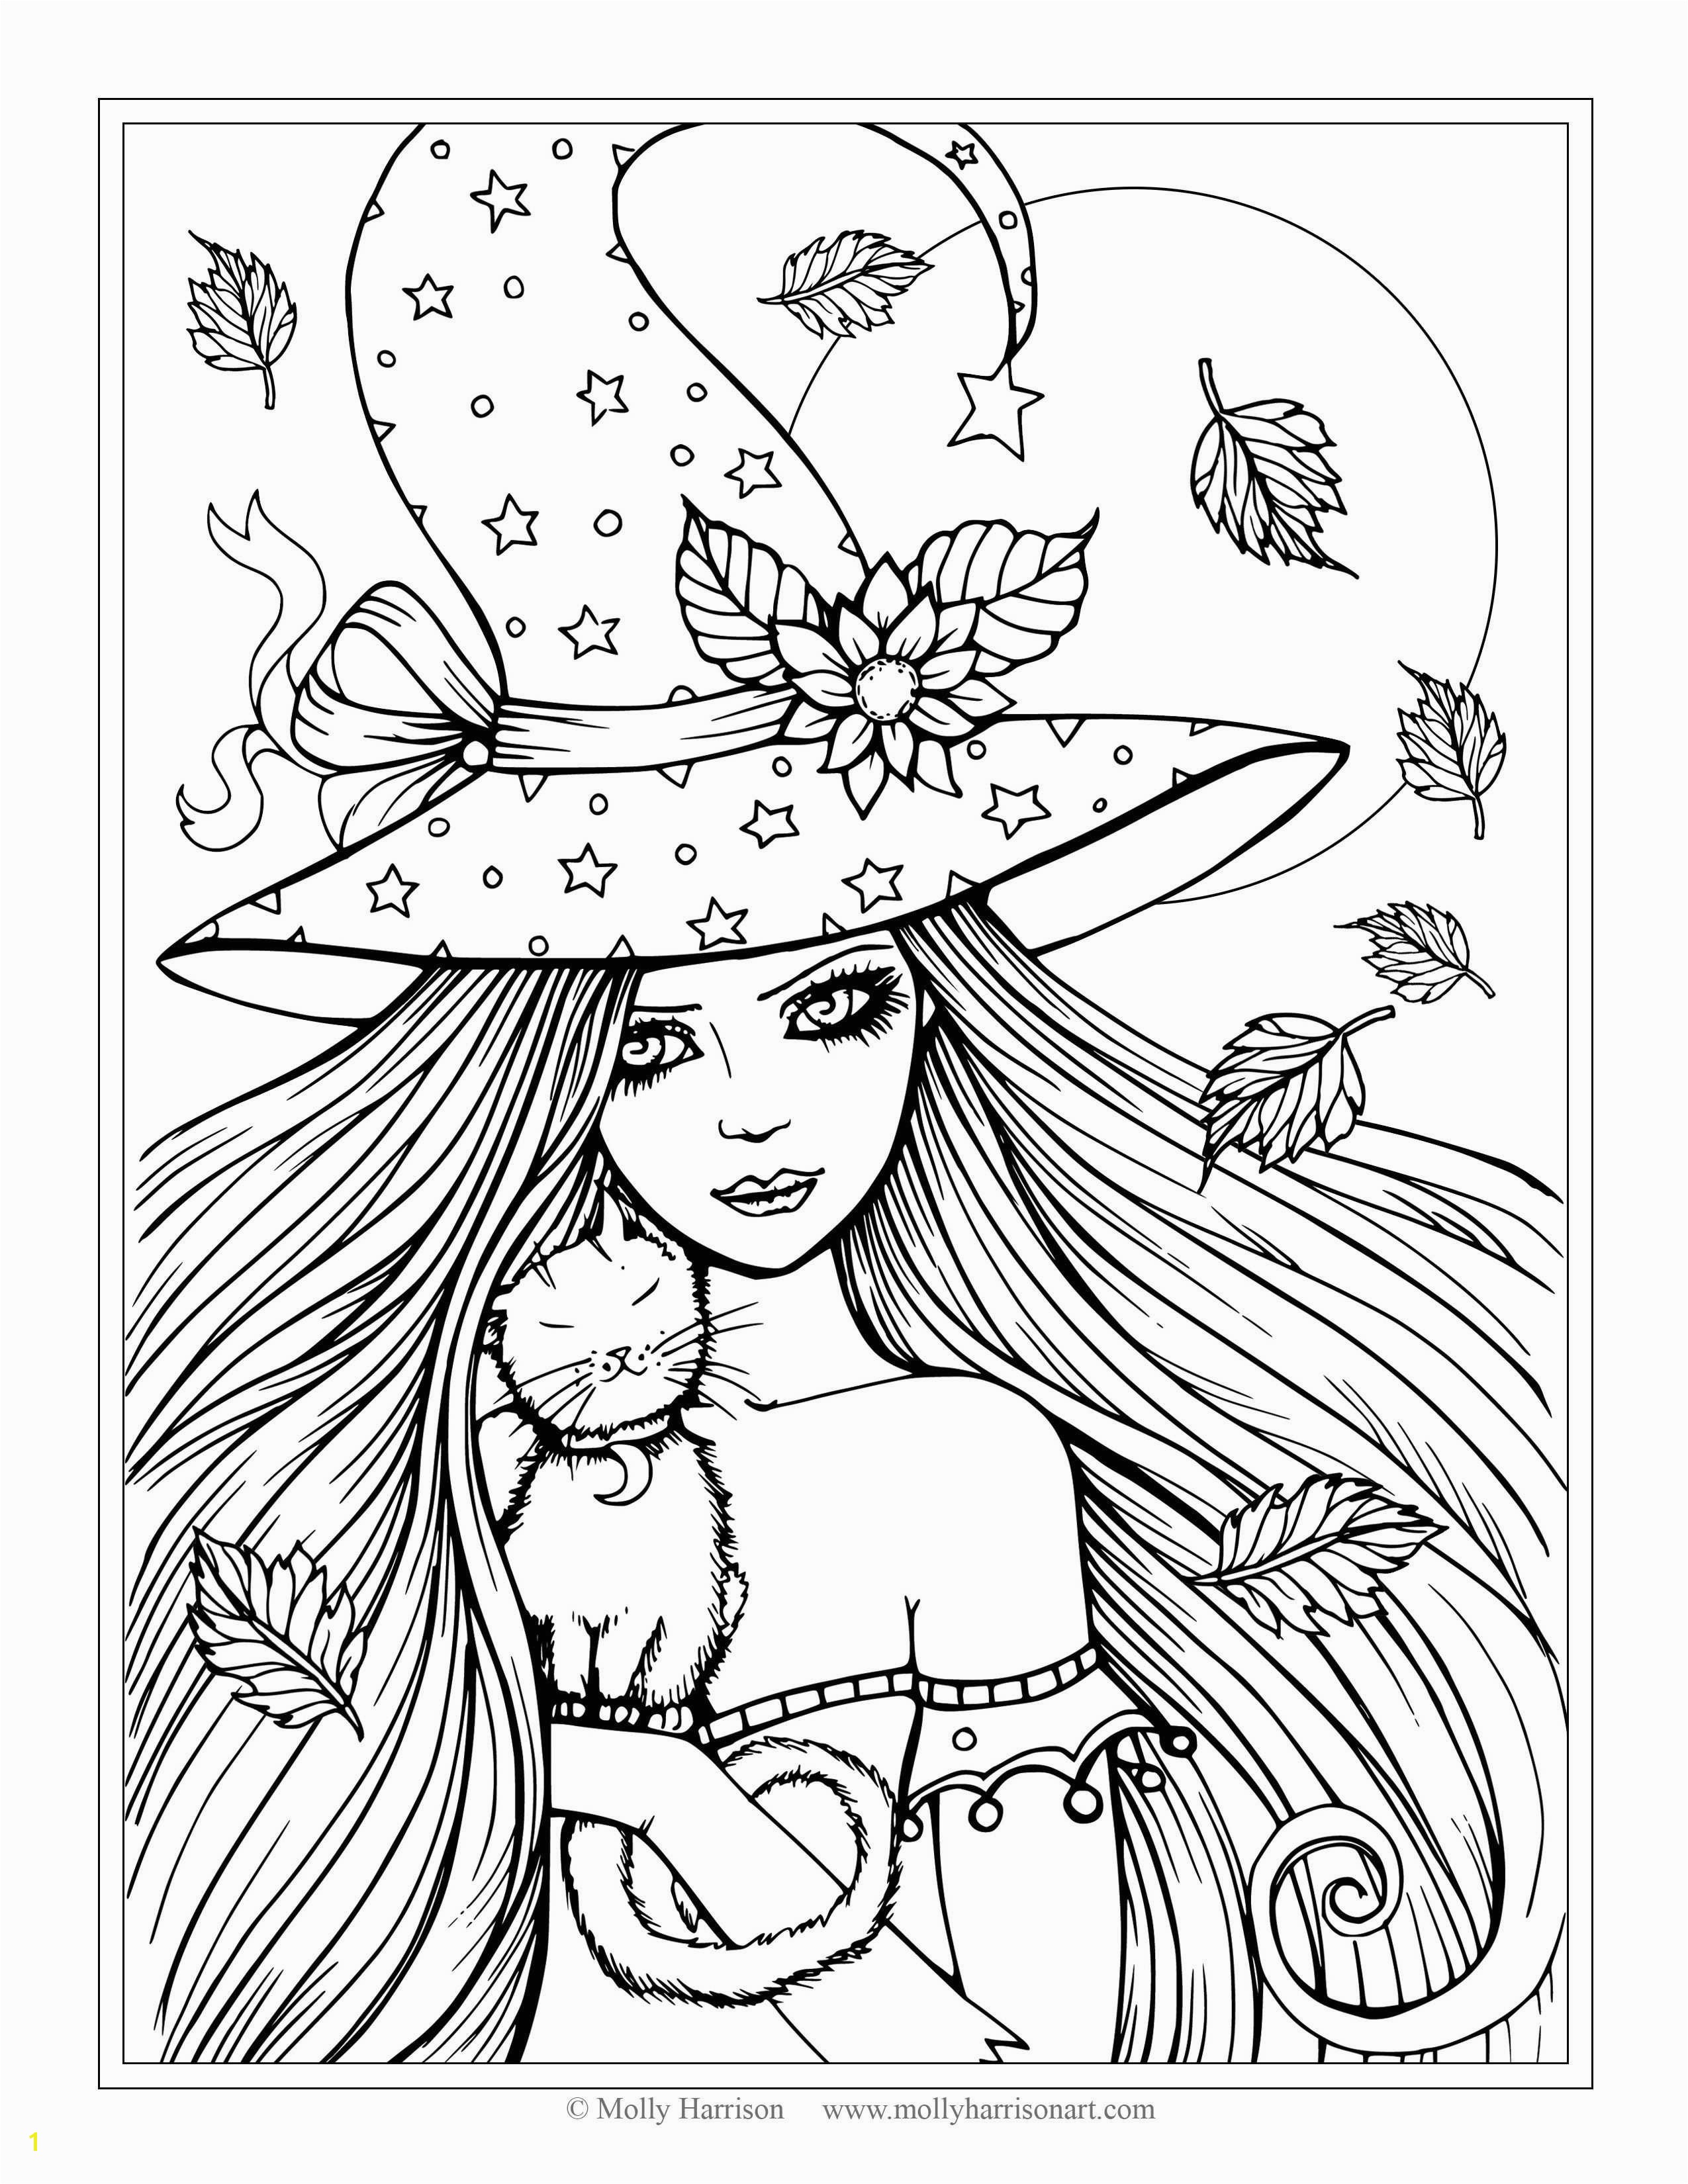 Leotard Coloring Pages Cats Coloring Pages Coloring Pages